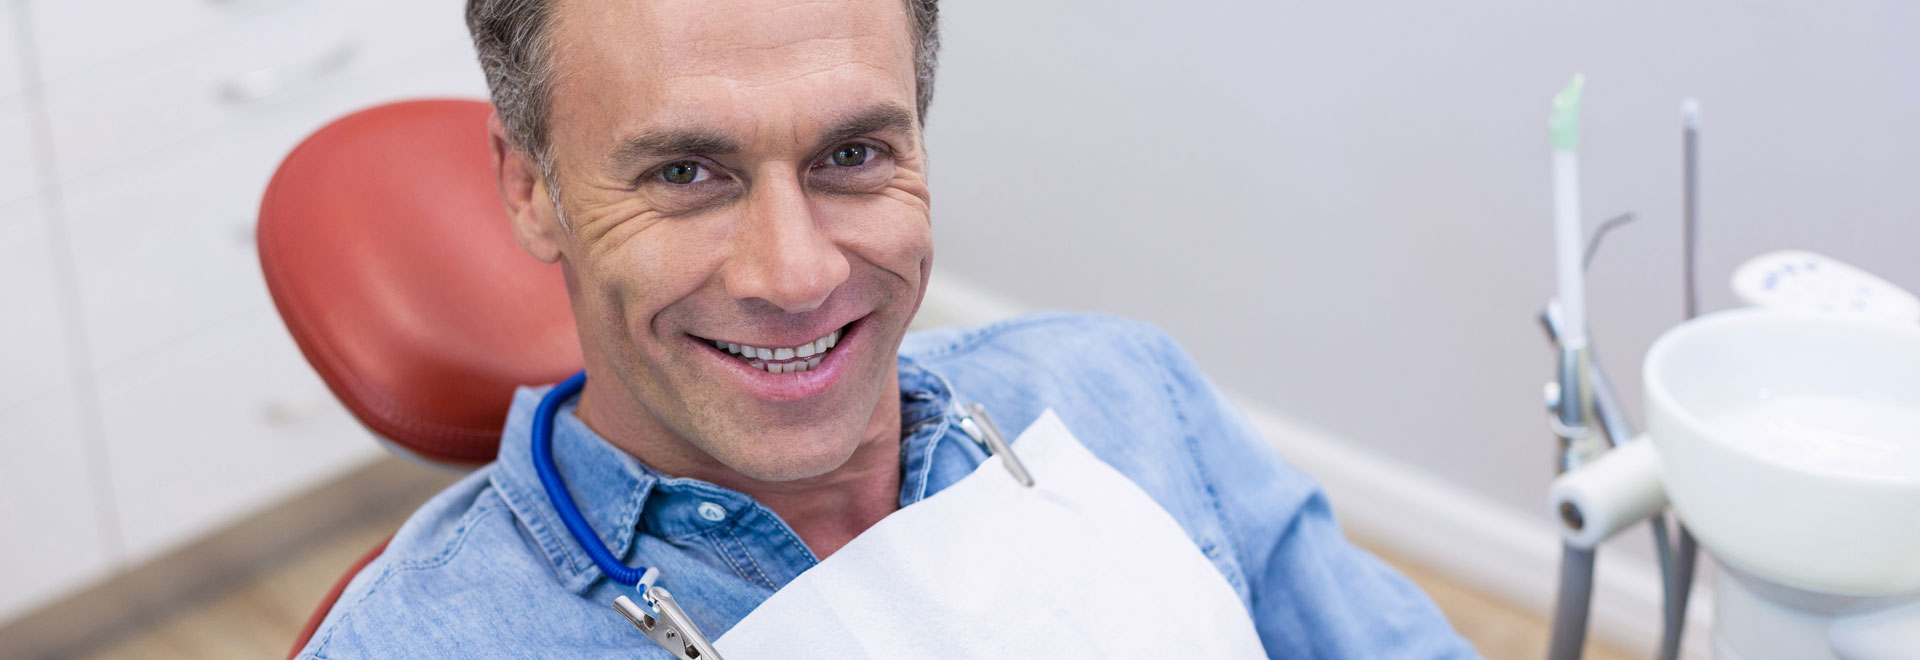 A man getting ready for root canal treatment